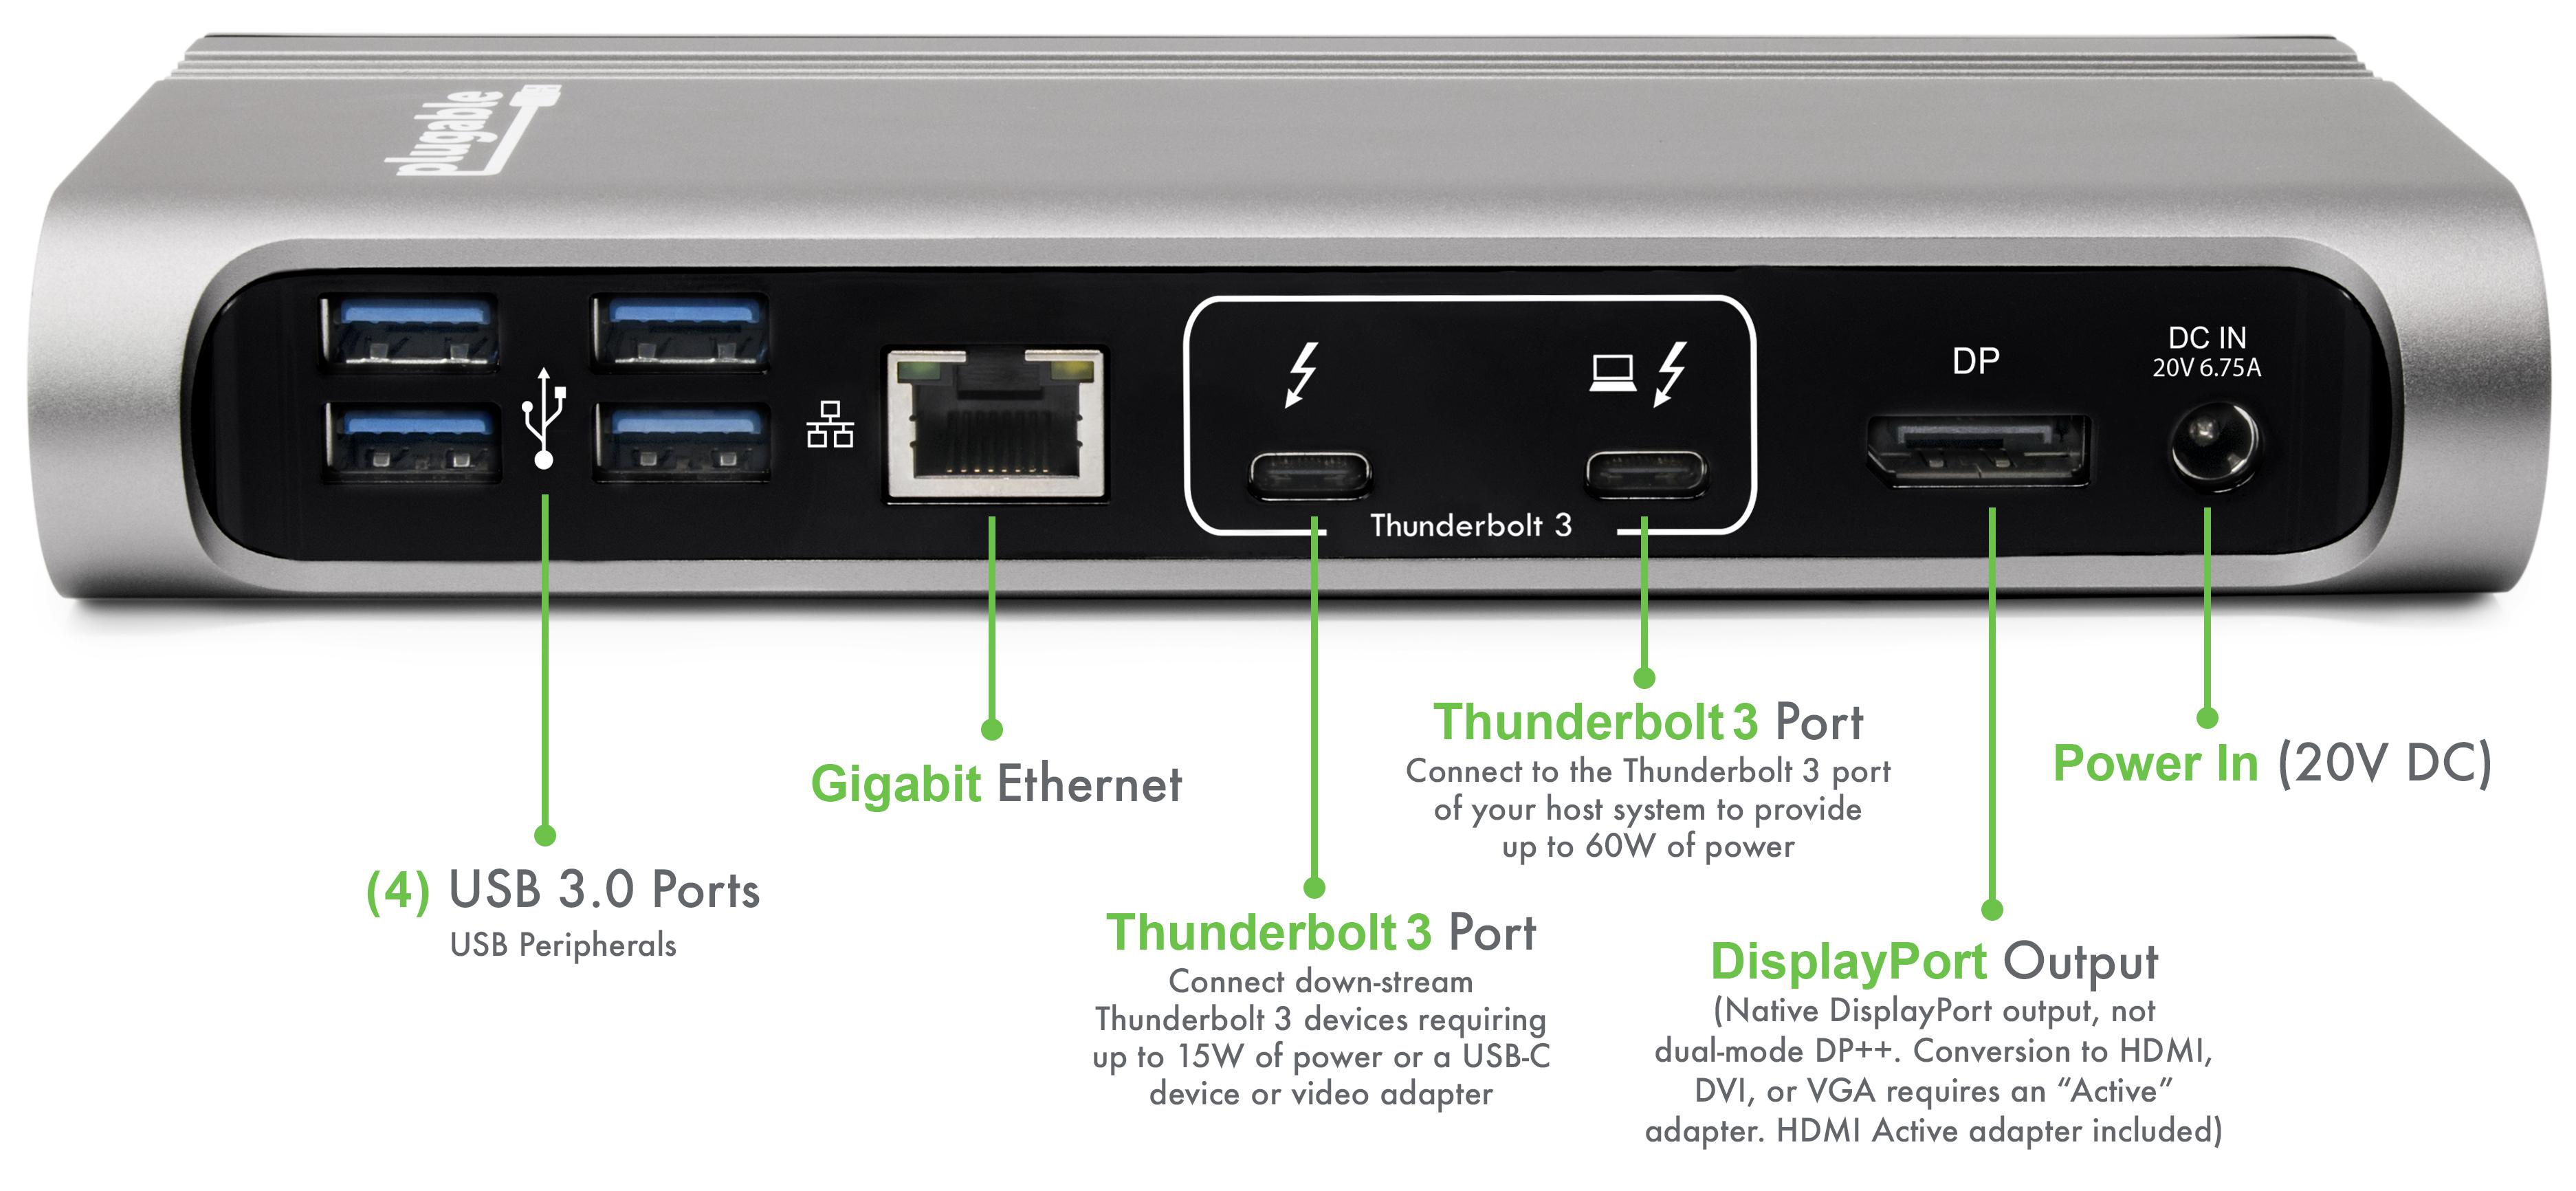 Plugable Thunderbolt 3 Dock Compatible with MacBook and Windows Laptops with Thunderbolt 3. Charges Laptop, adds HDMI / DisplayPort up to 4K 60, Ethernet, Audio, 5 USB 3.0 Ports - image 4 of 6